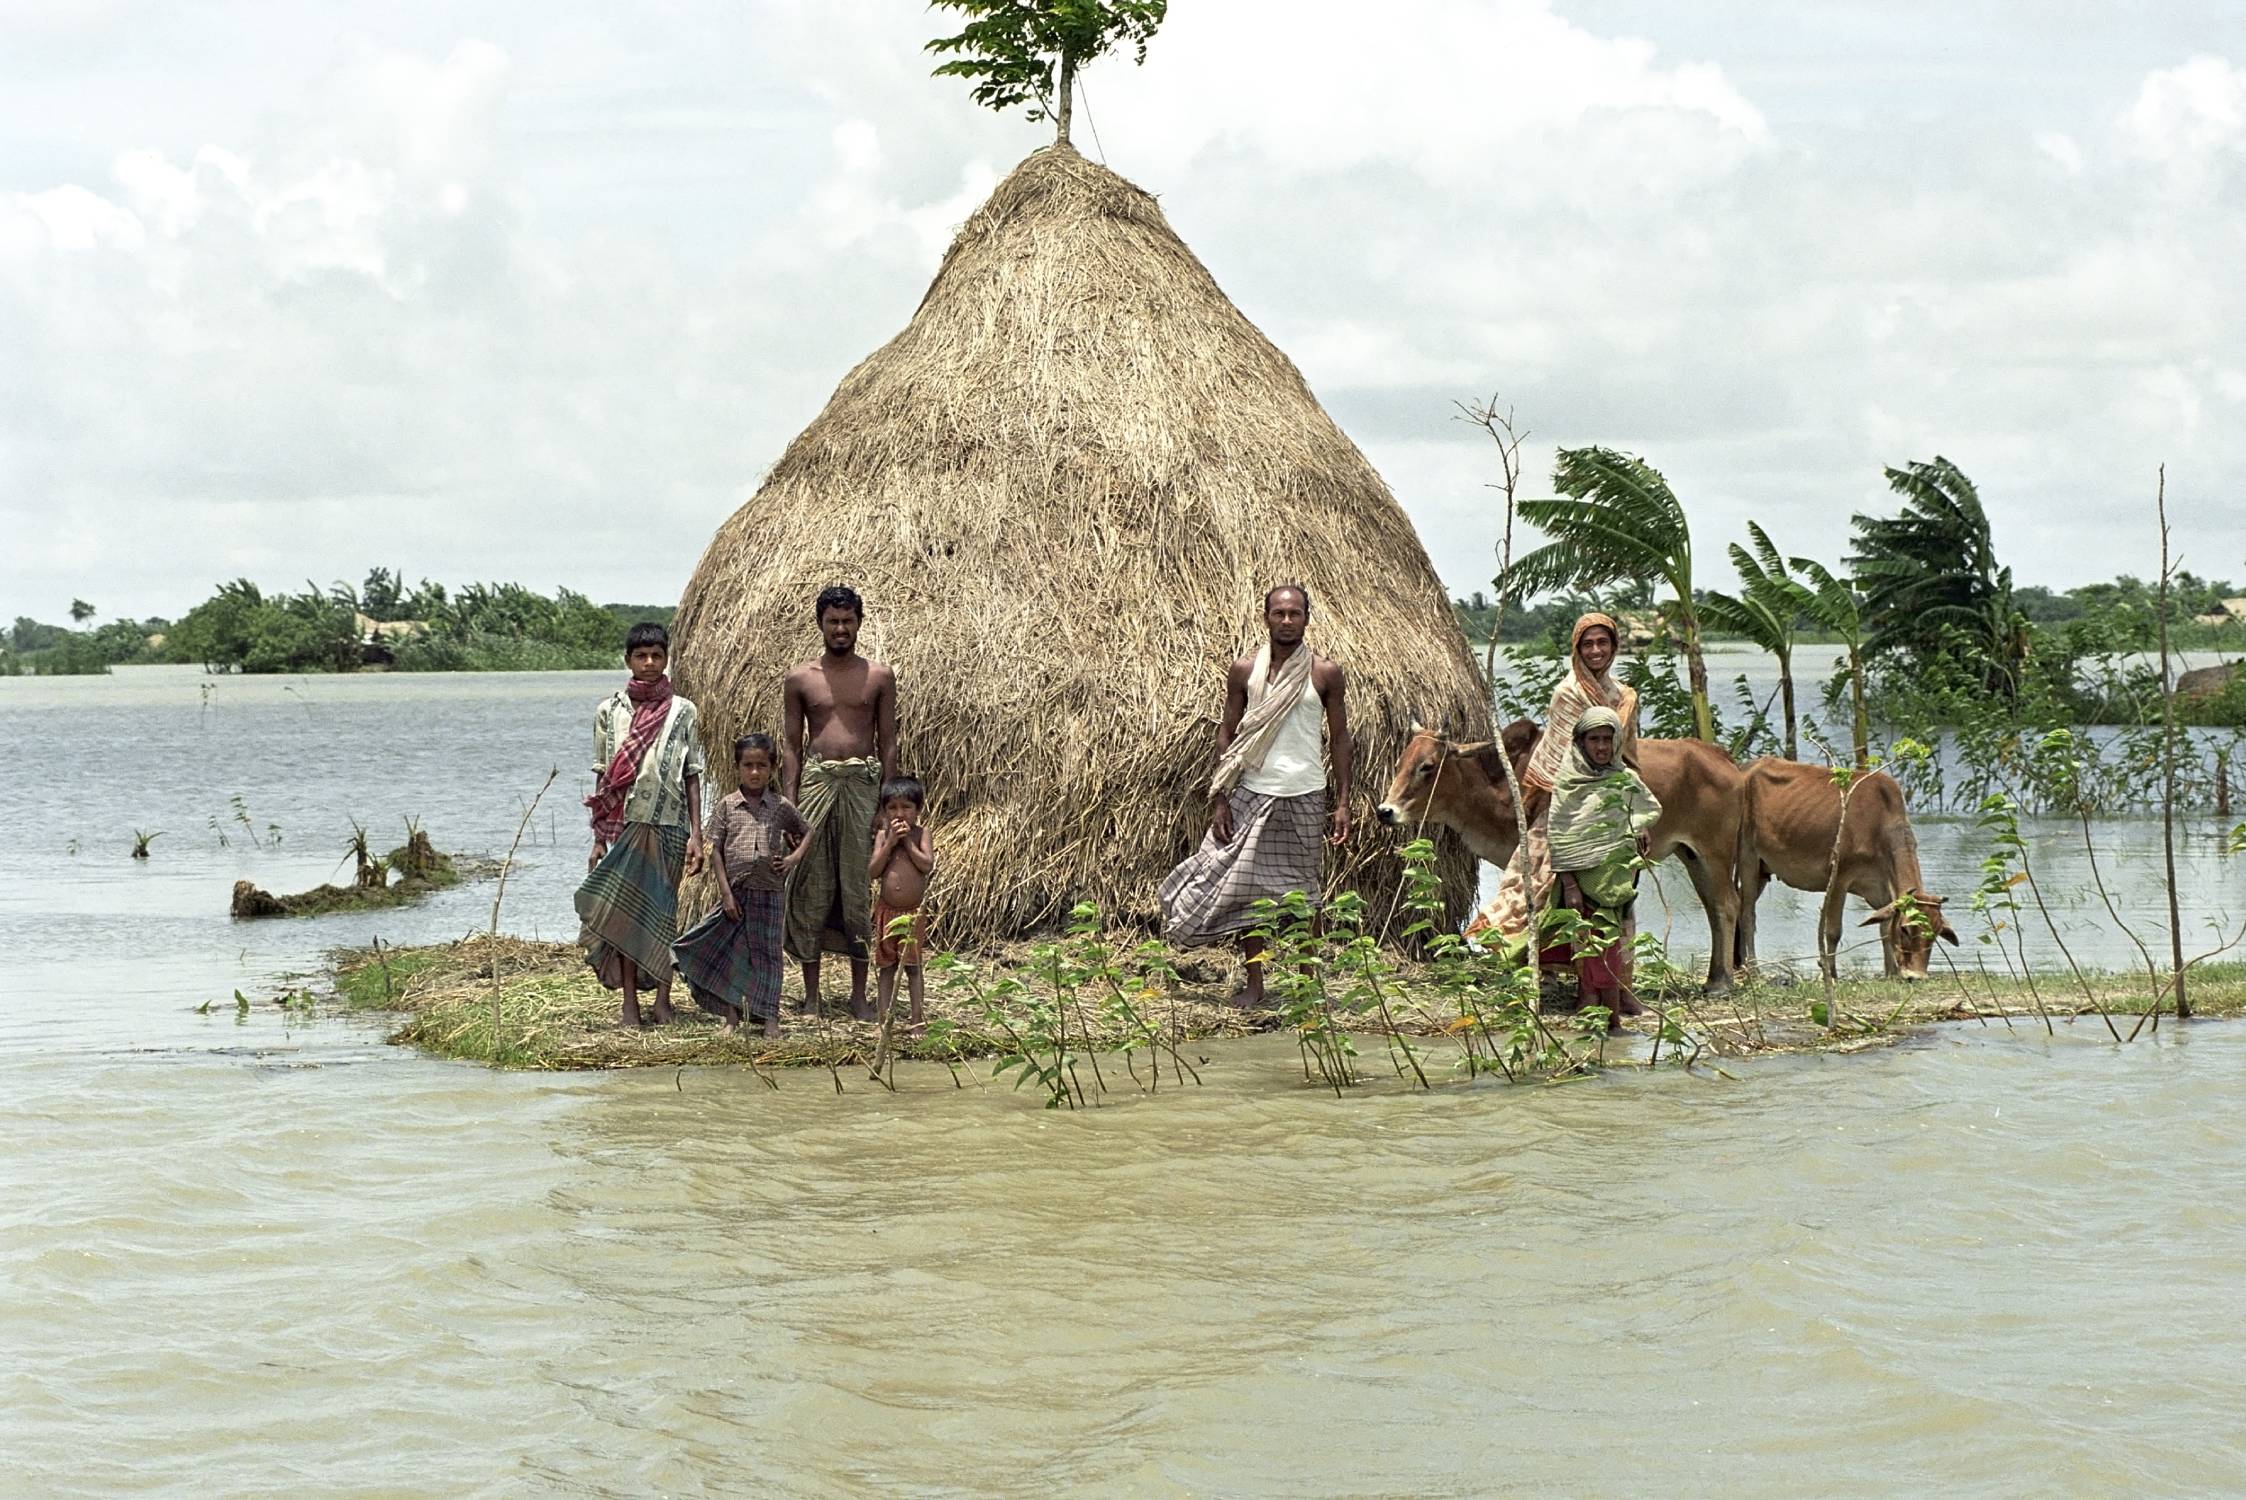 Flooding in Bangladesh, village Charburhan on the island of Charkajal, Bay, Gulf of Bengal.. Photo ID 62637093 © Sjors737 | Dreamstime.com